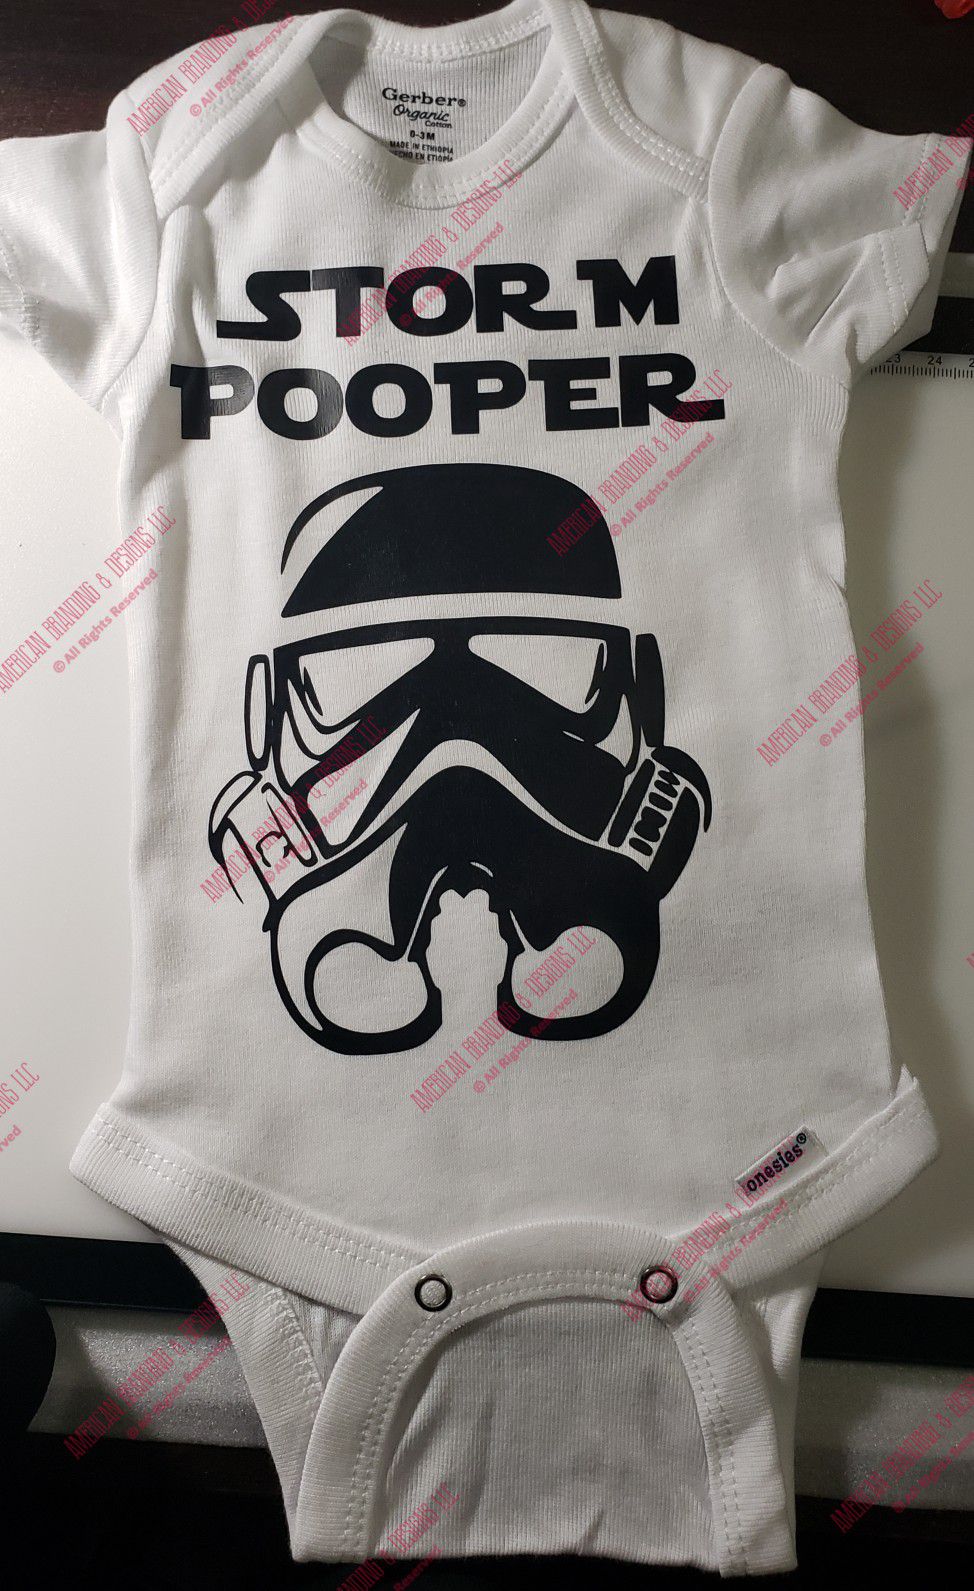 Shirts and items baby and adult (please read description)